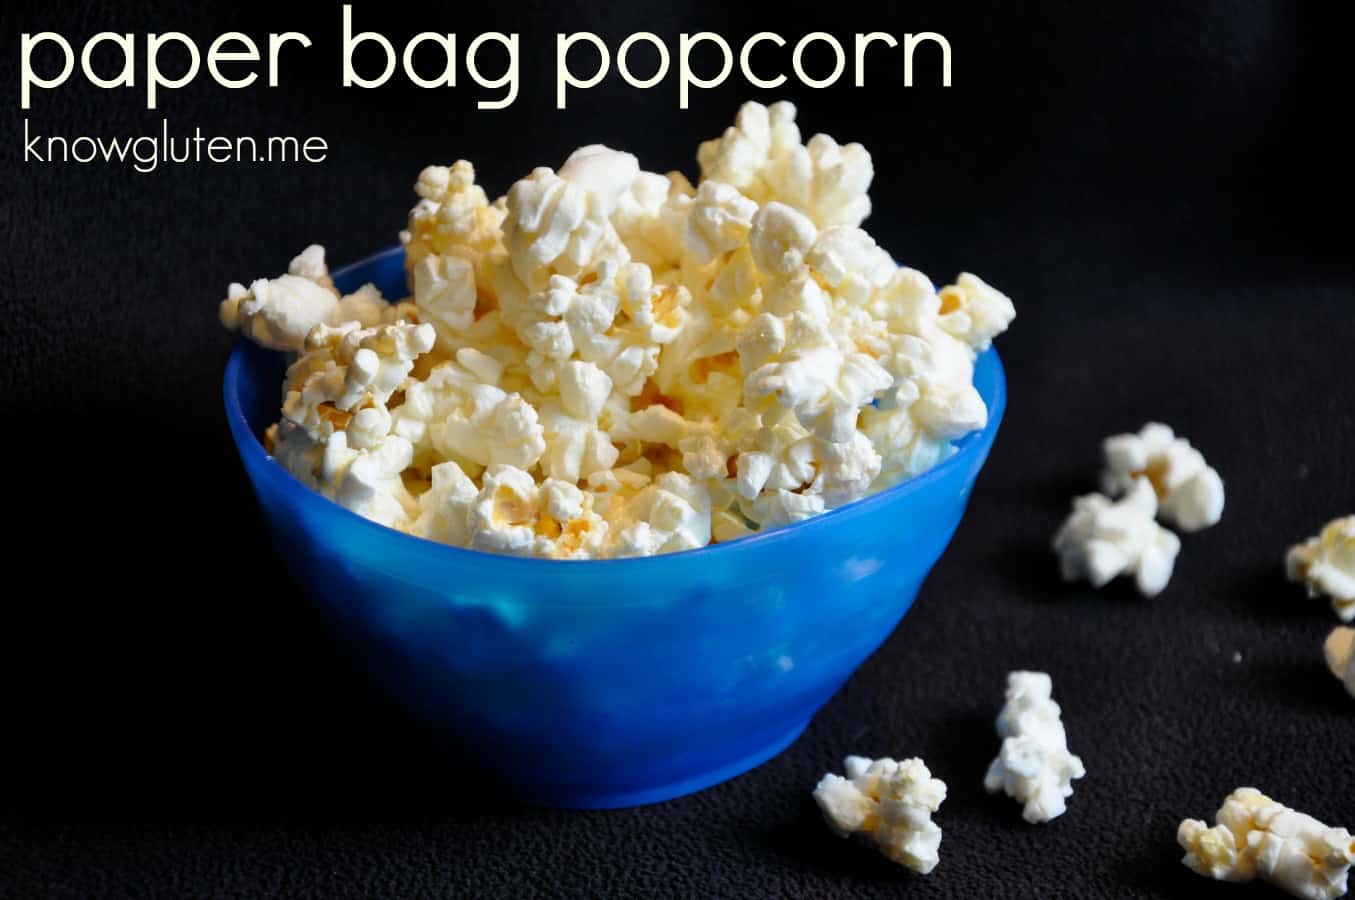 Paper bag popcorn from knowgluten.me